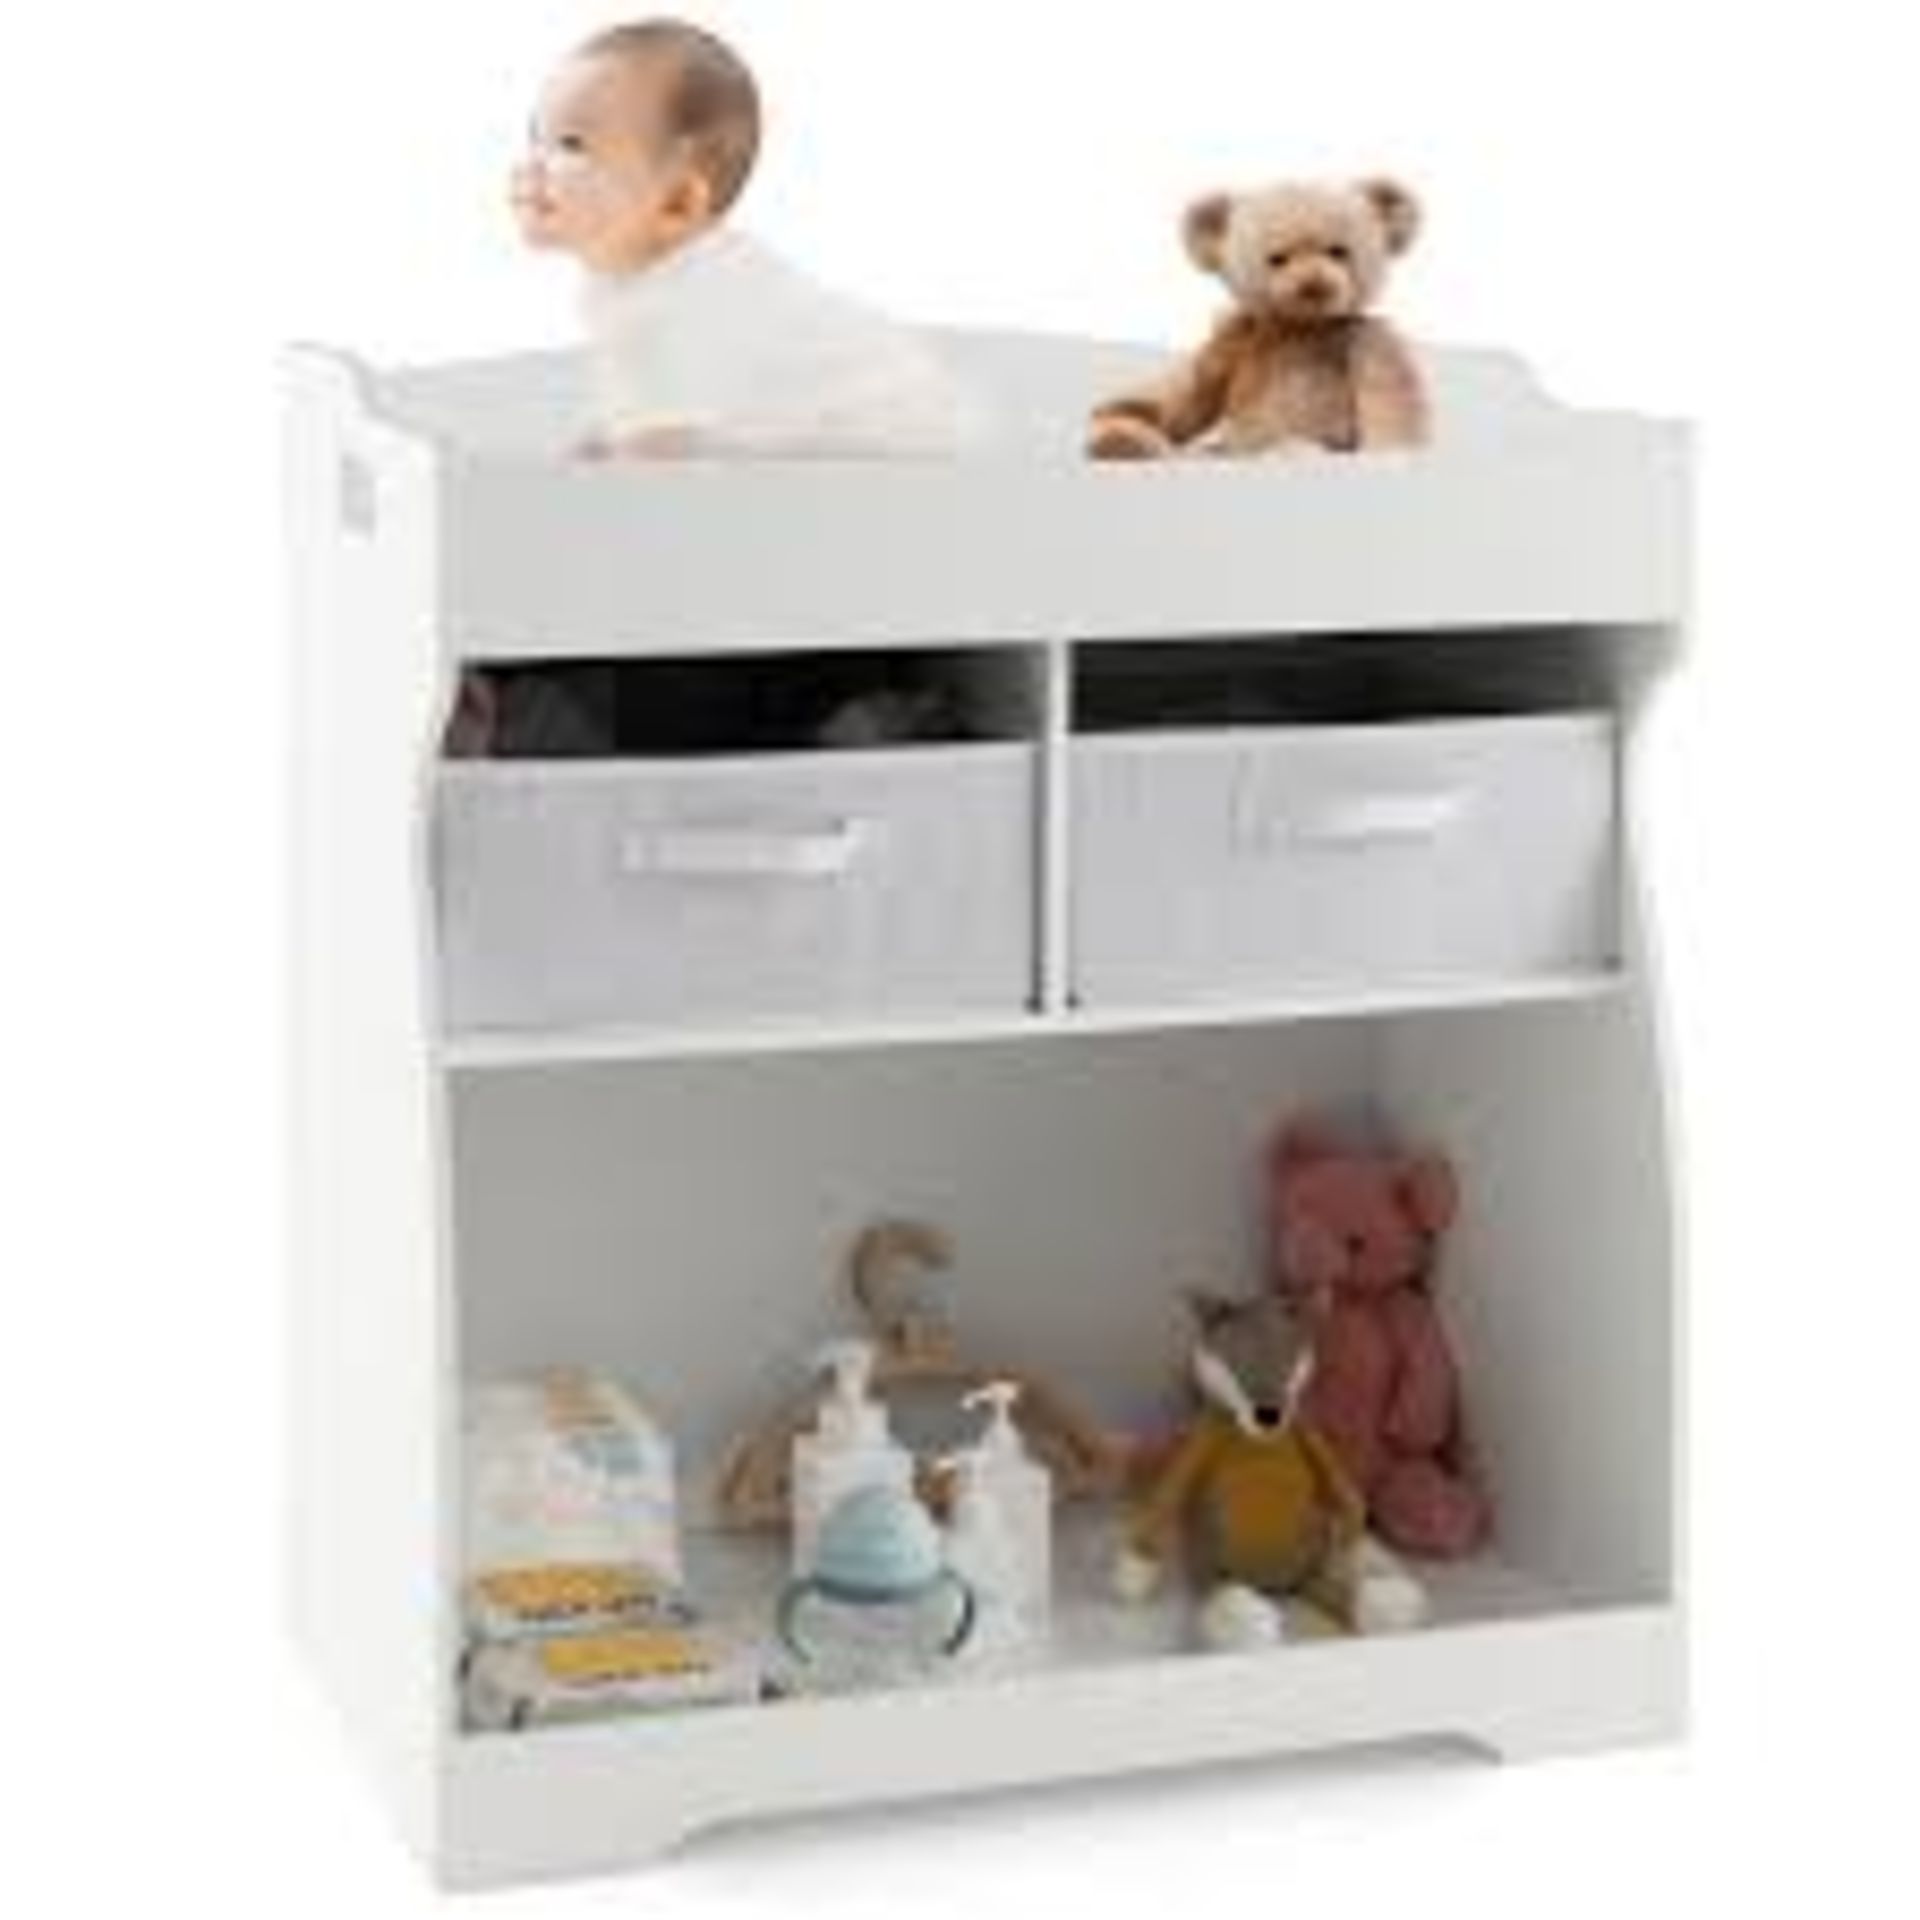 Baby Changing Table with 2 Drawer and Waterproof Changing Pad. - R14.15. This dresser can be used as